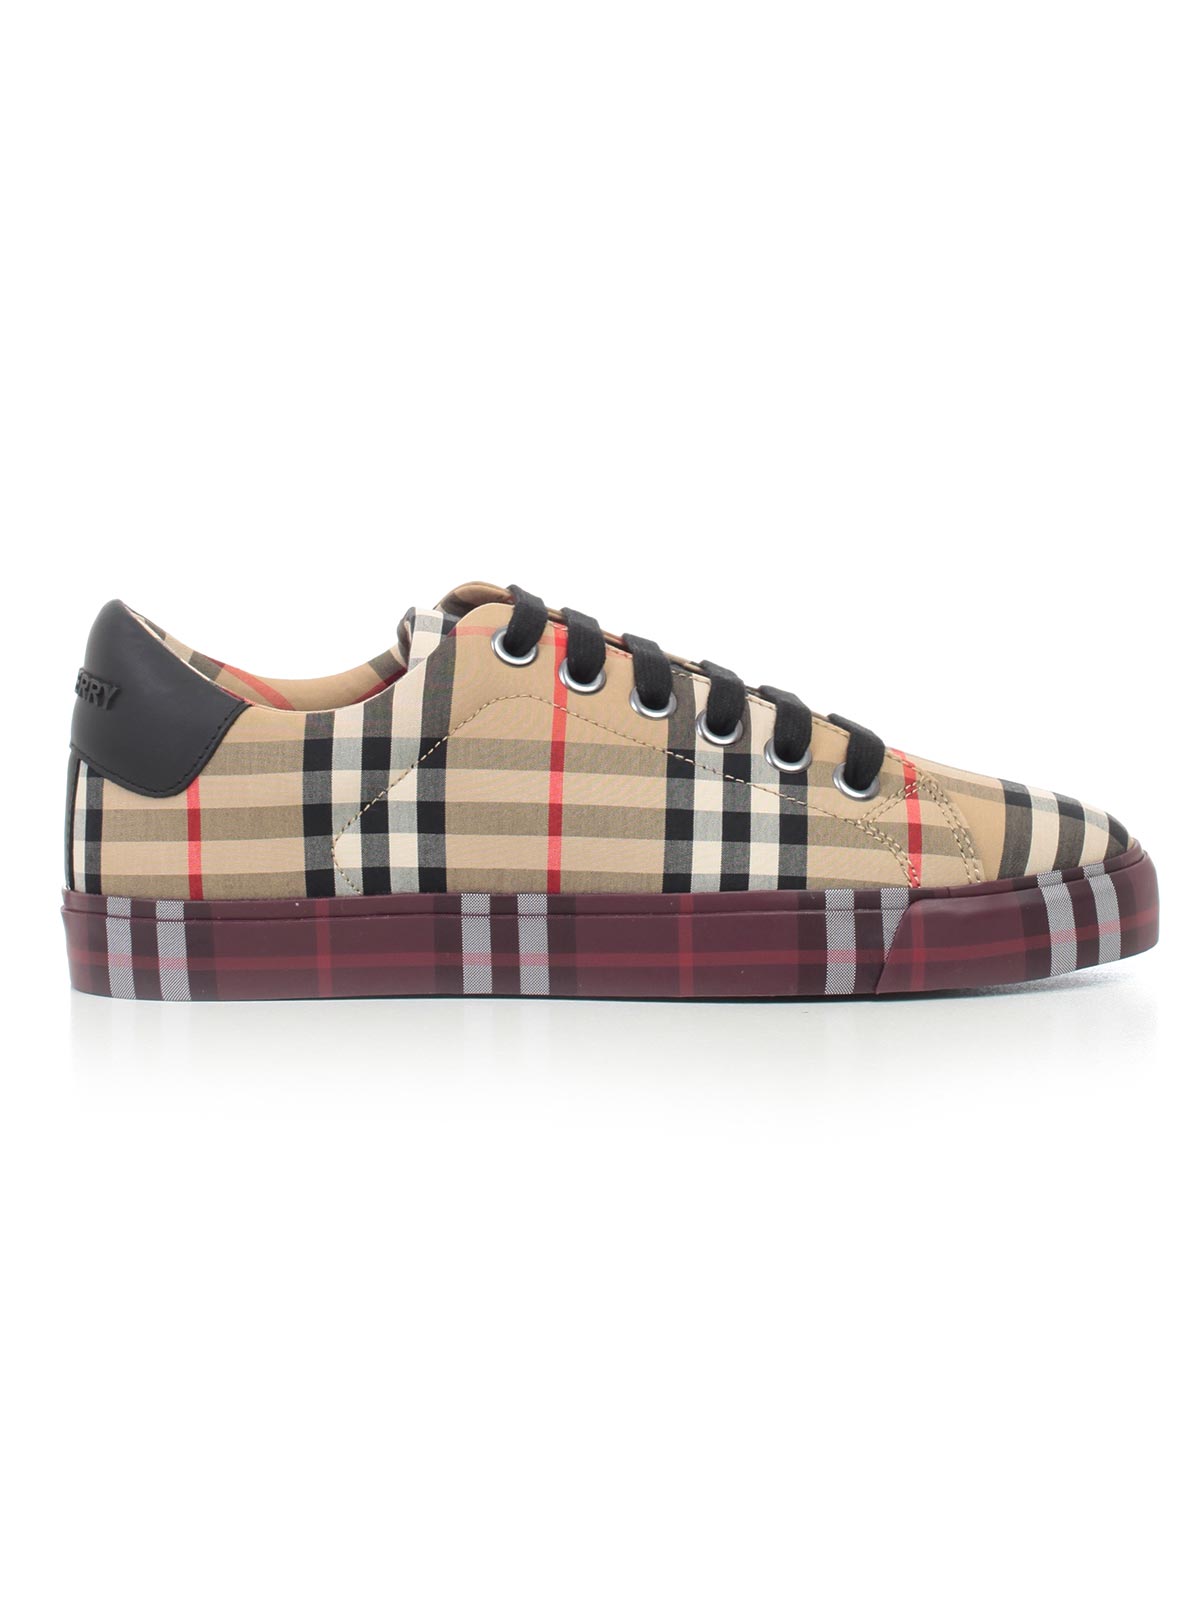 burberry shoes china